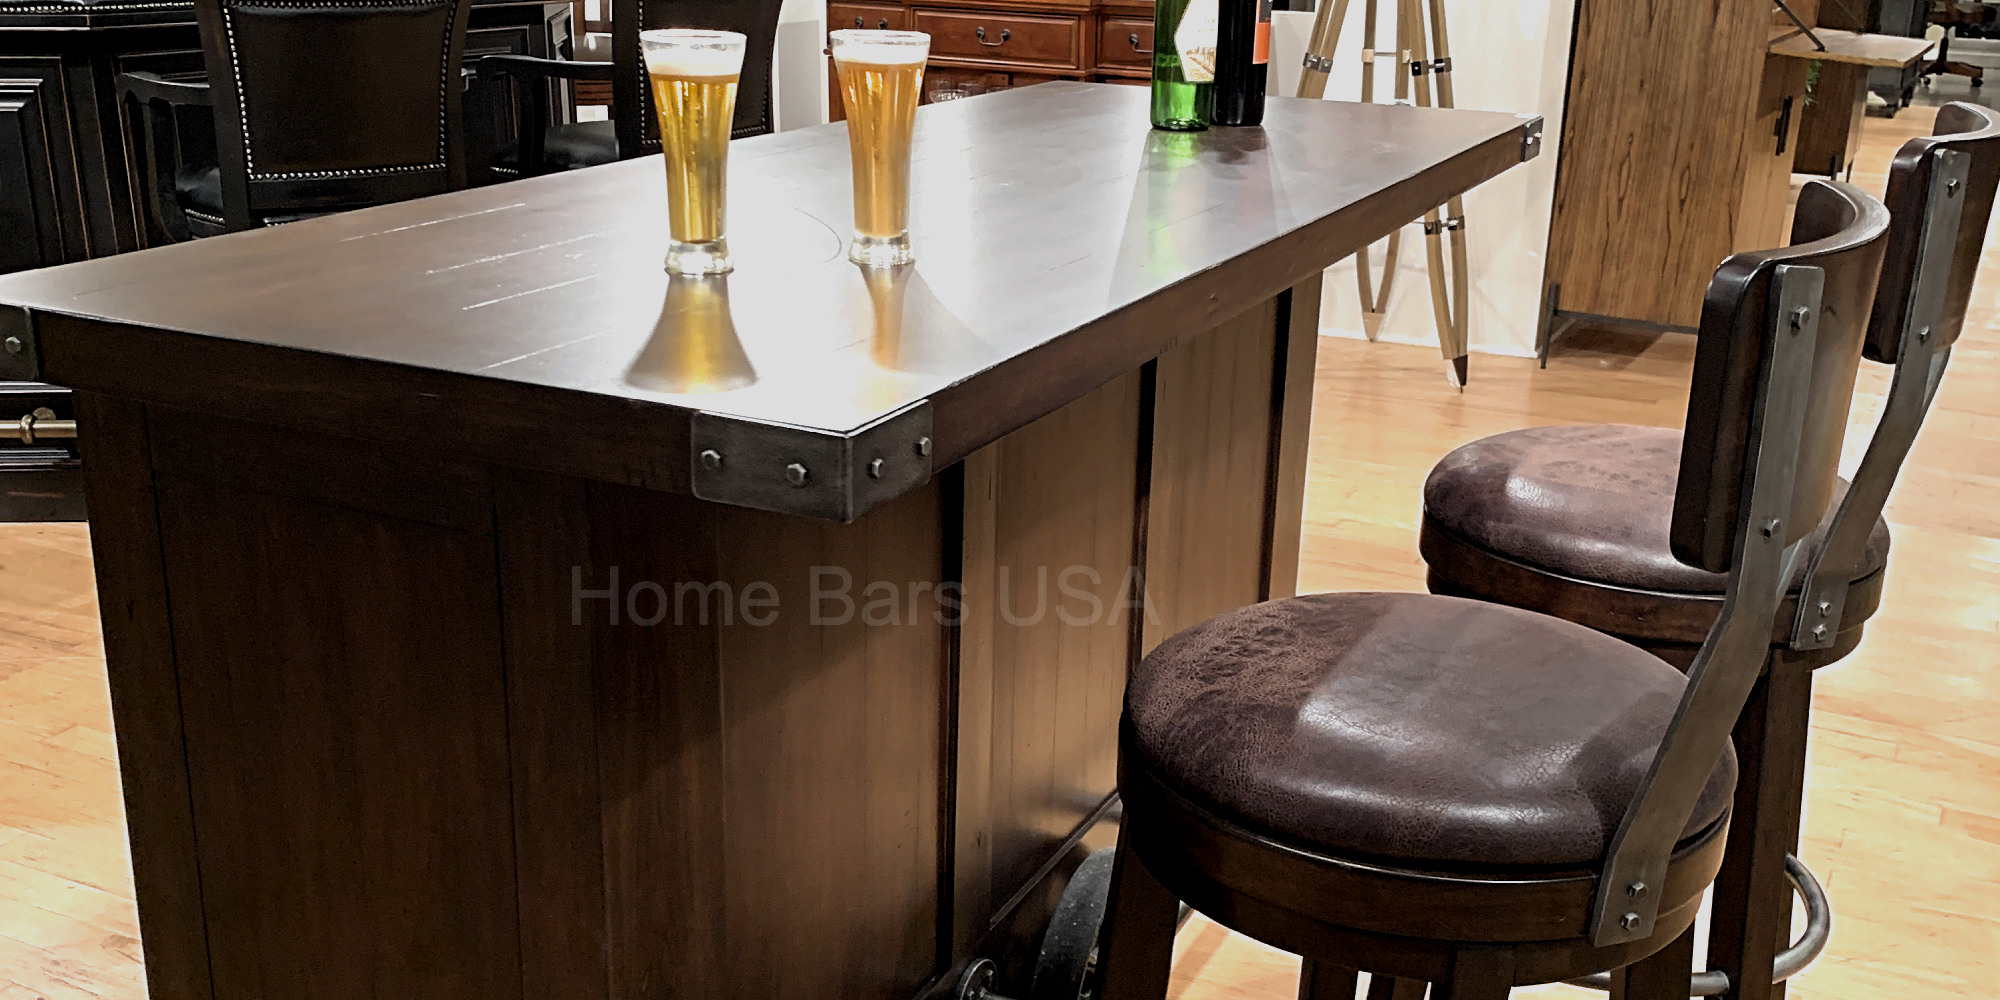 Bar Stools Buyers Guide